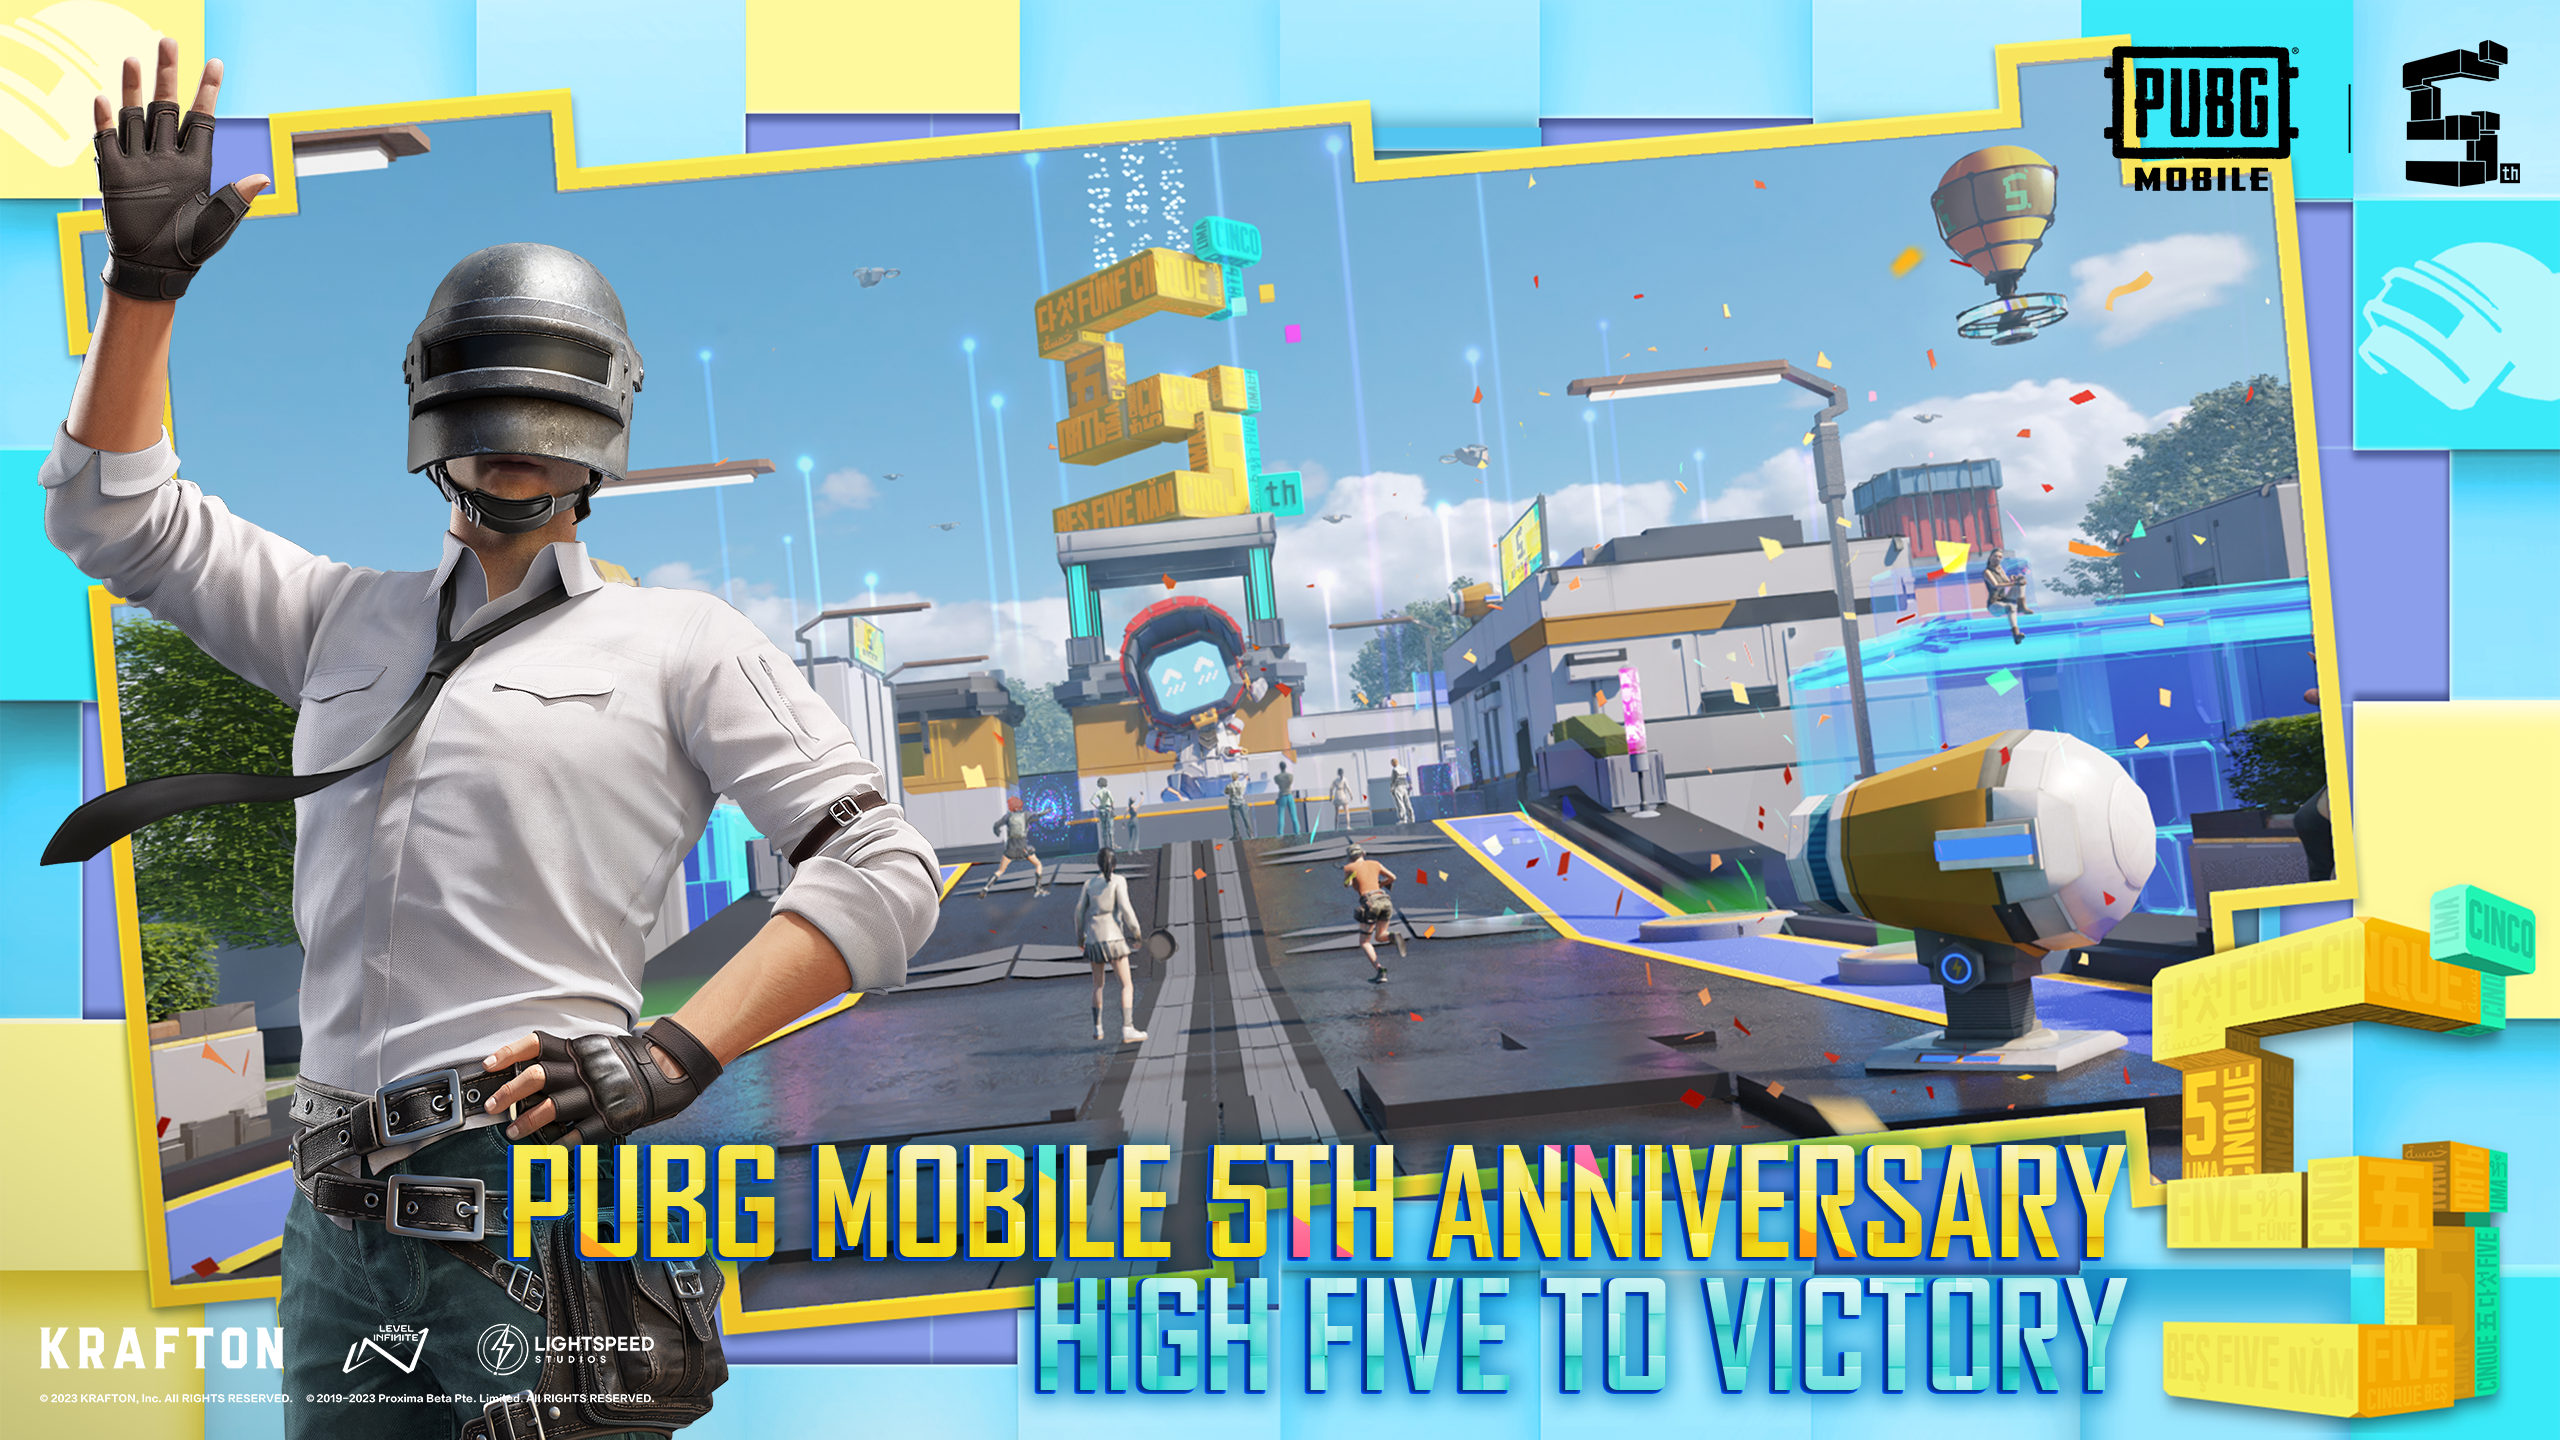 PUBG Mobile’s 5th Anniversary – High five to victory and experience the WOW  [PRESS RELEASE]